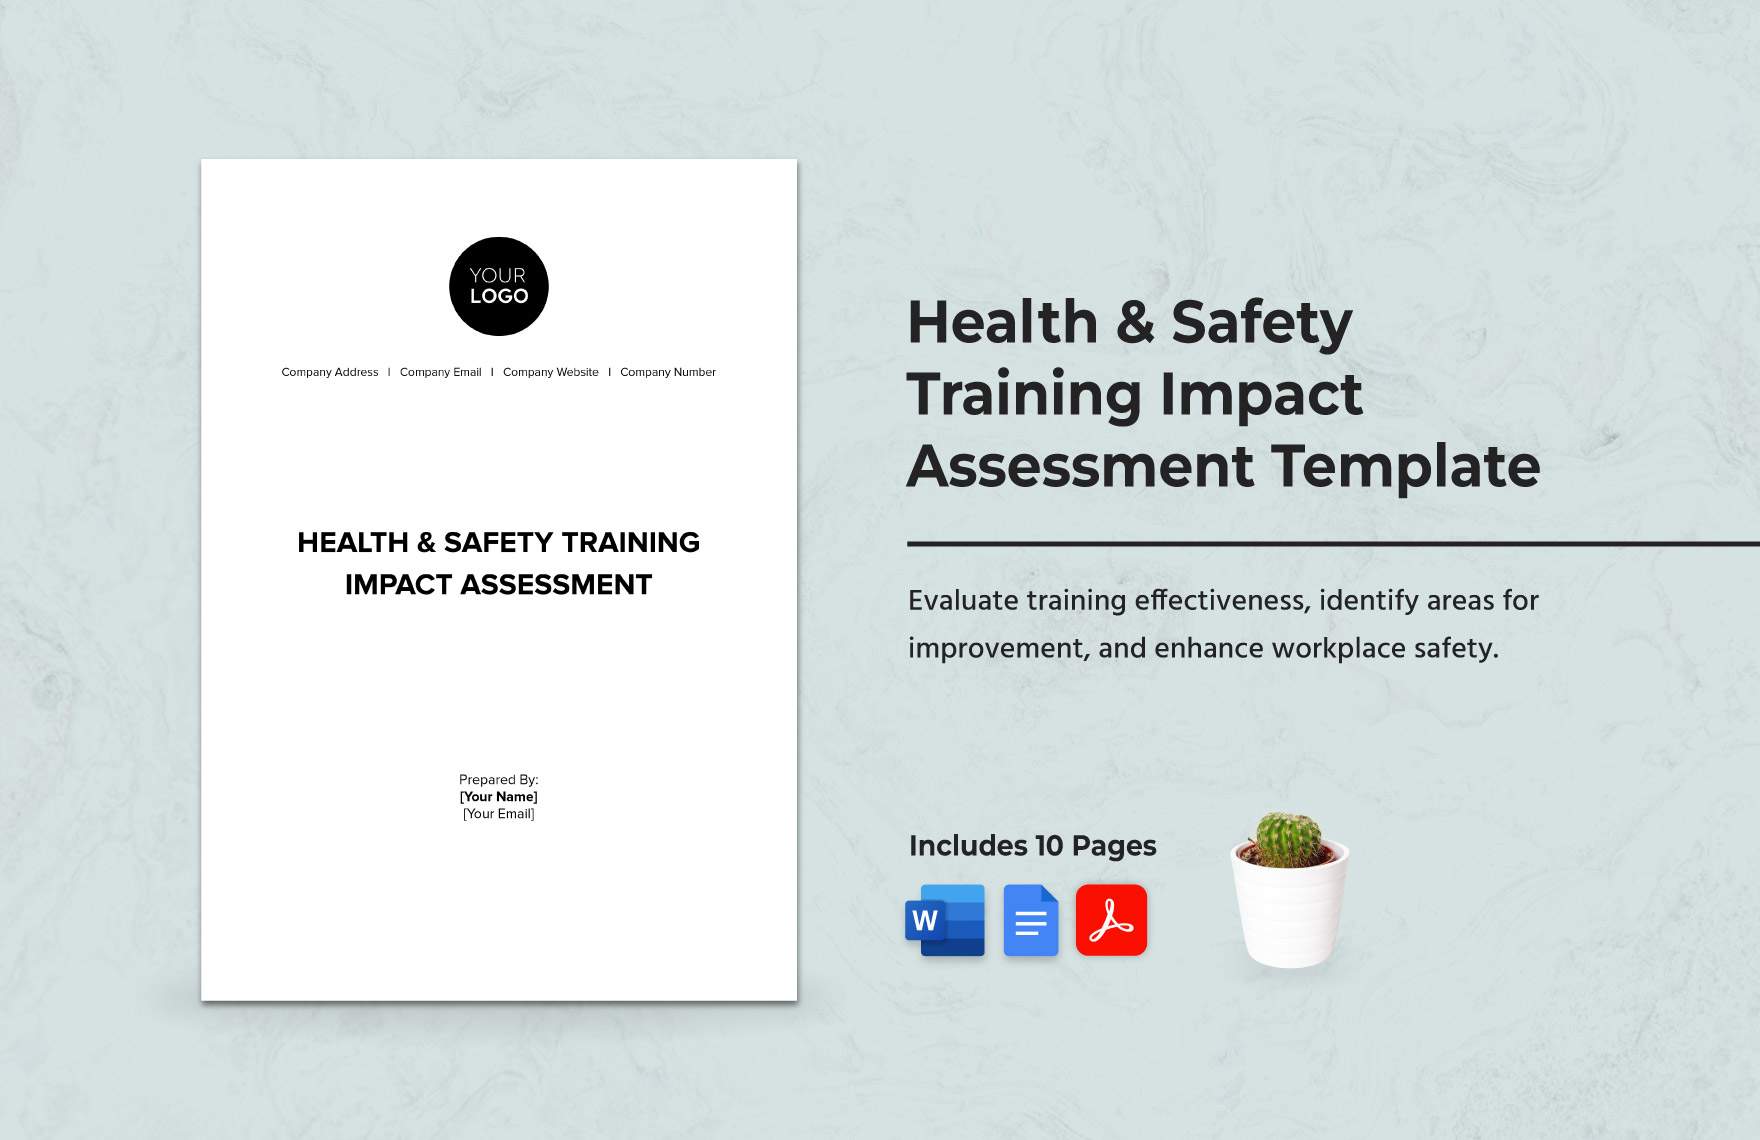 Health & Safety Training Impact Assessment Template in Word, Google Docs, PDF